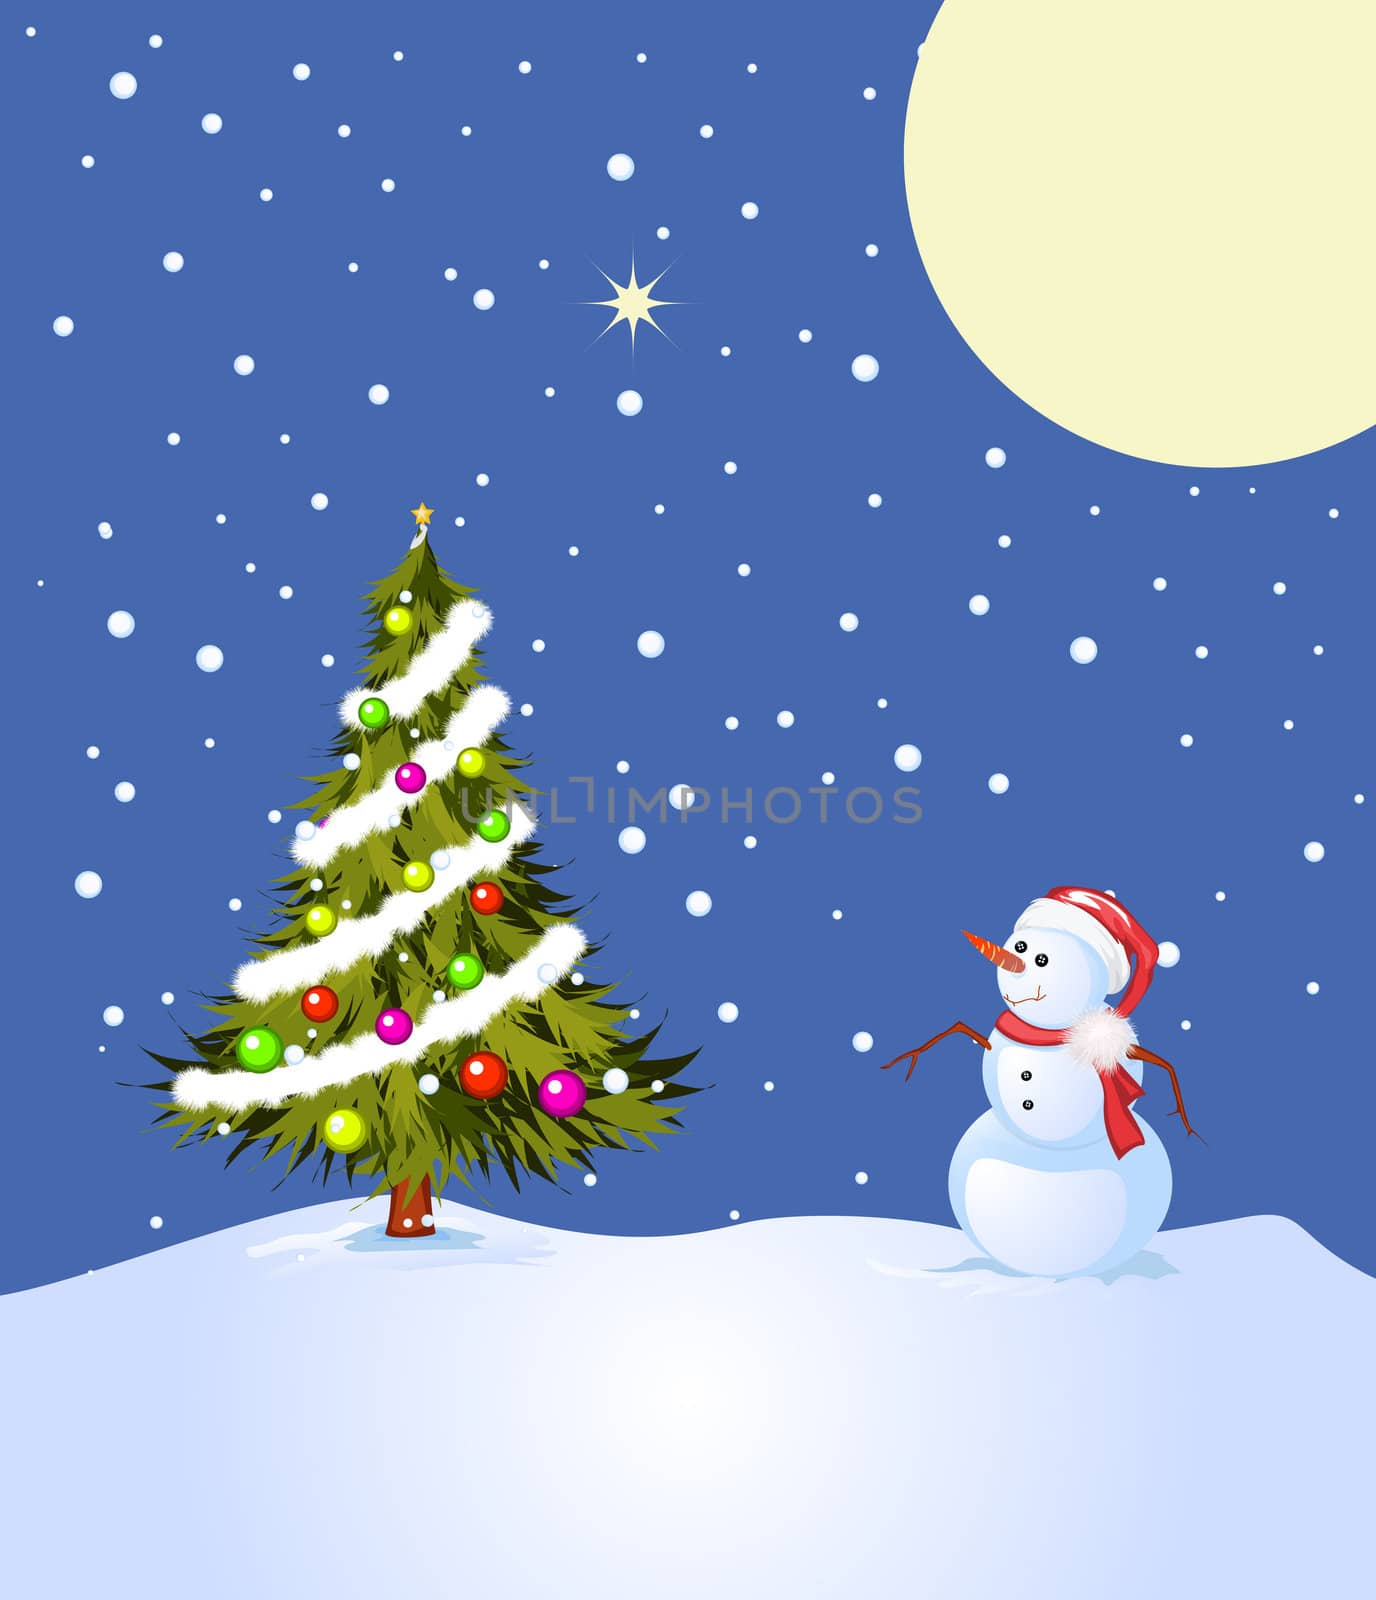 Holly night, illustration with snowman and decorated Christmas tree